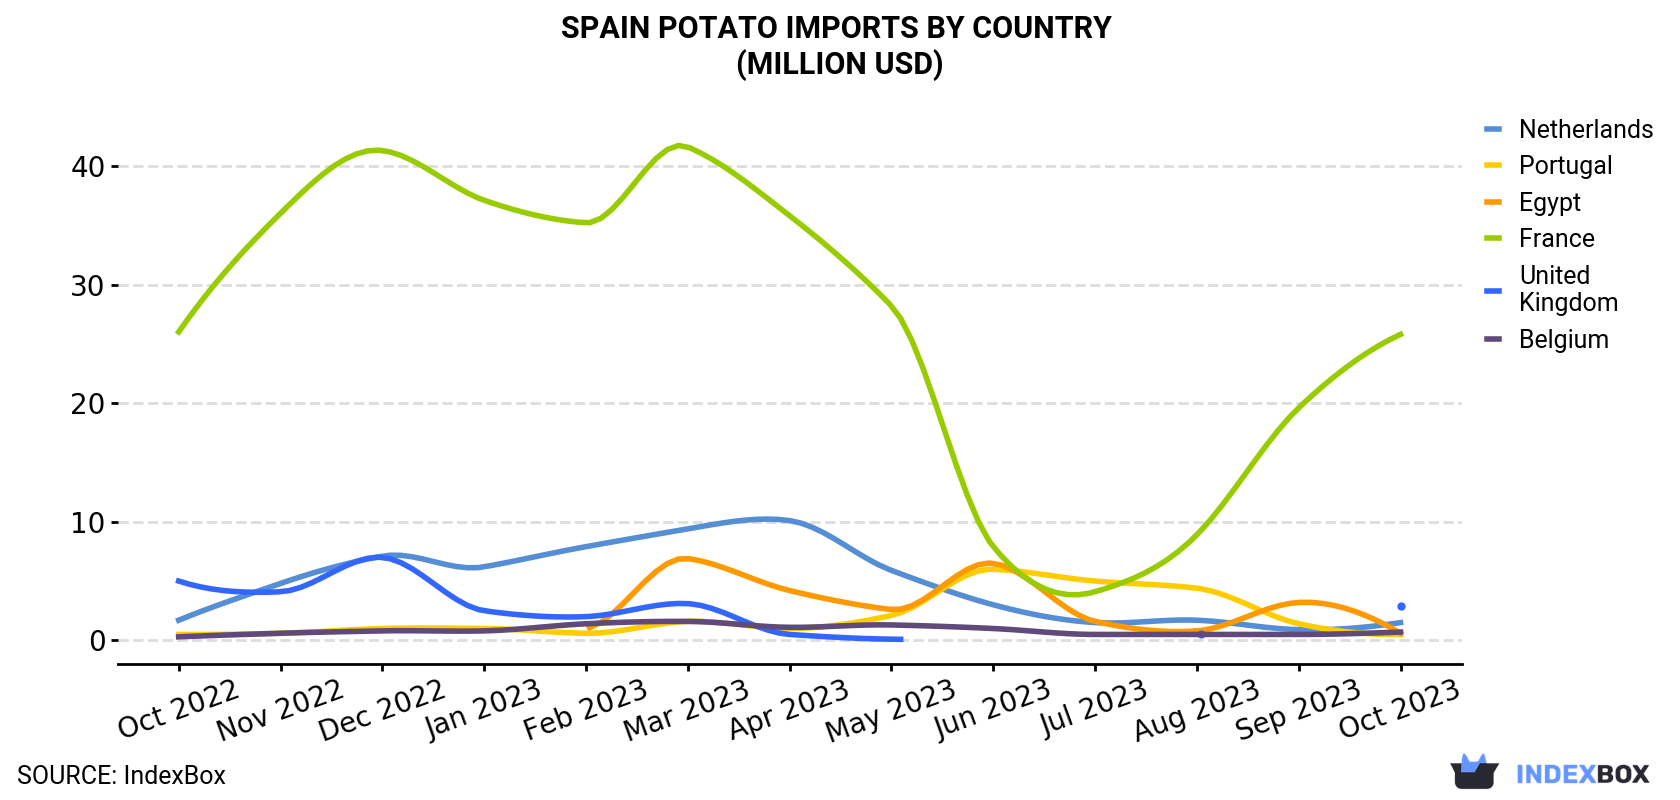 Spain Potato Imports By Country (Million USD)